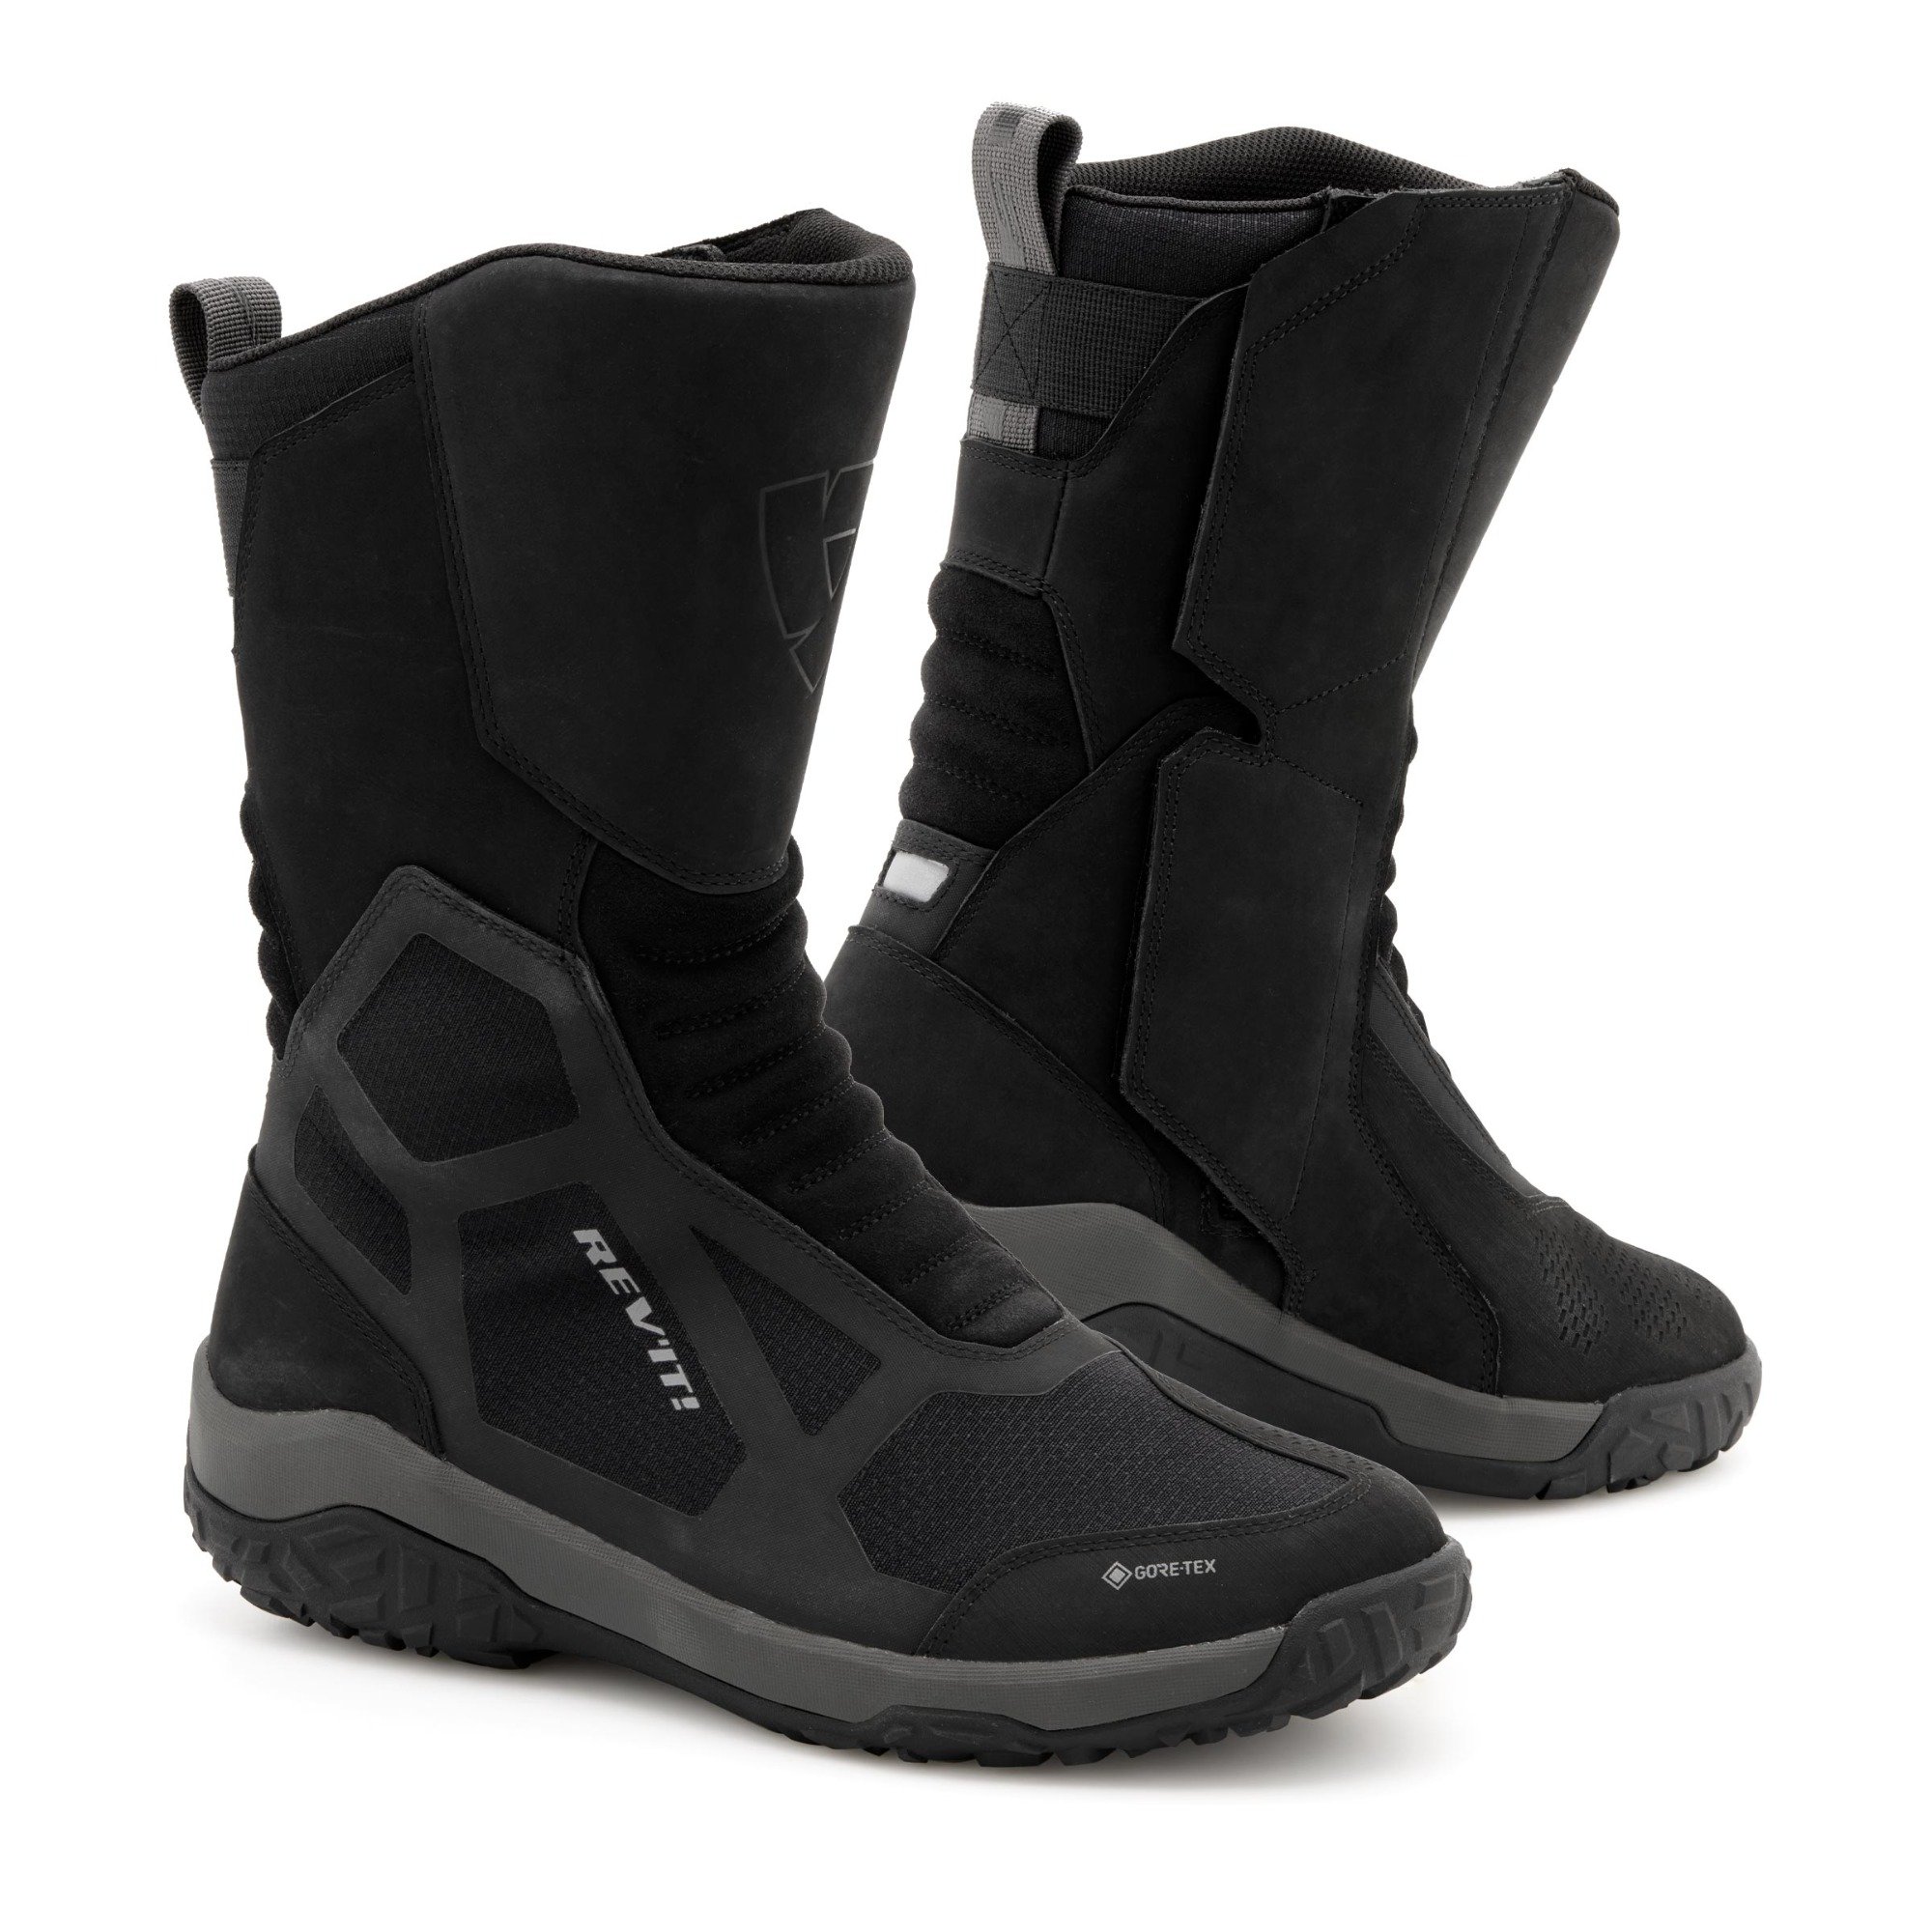 Image of REV'IT! Everest GTX Boots Black Size 48 ID 8700001328593